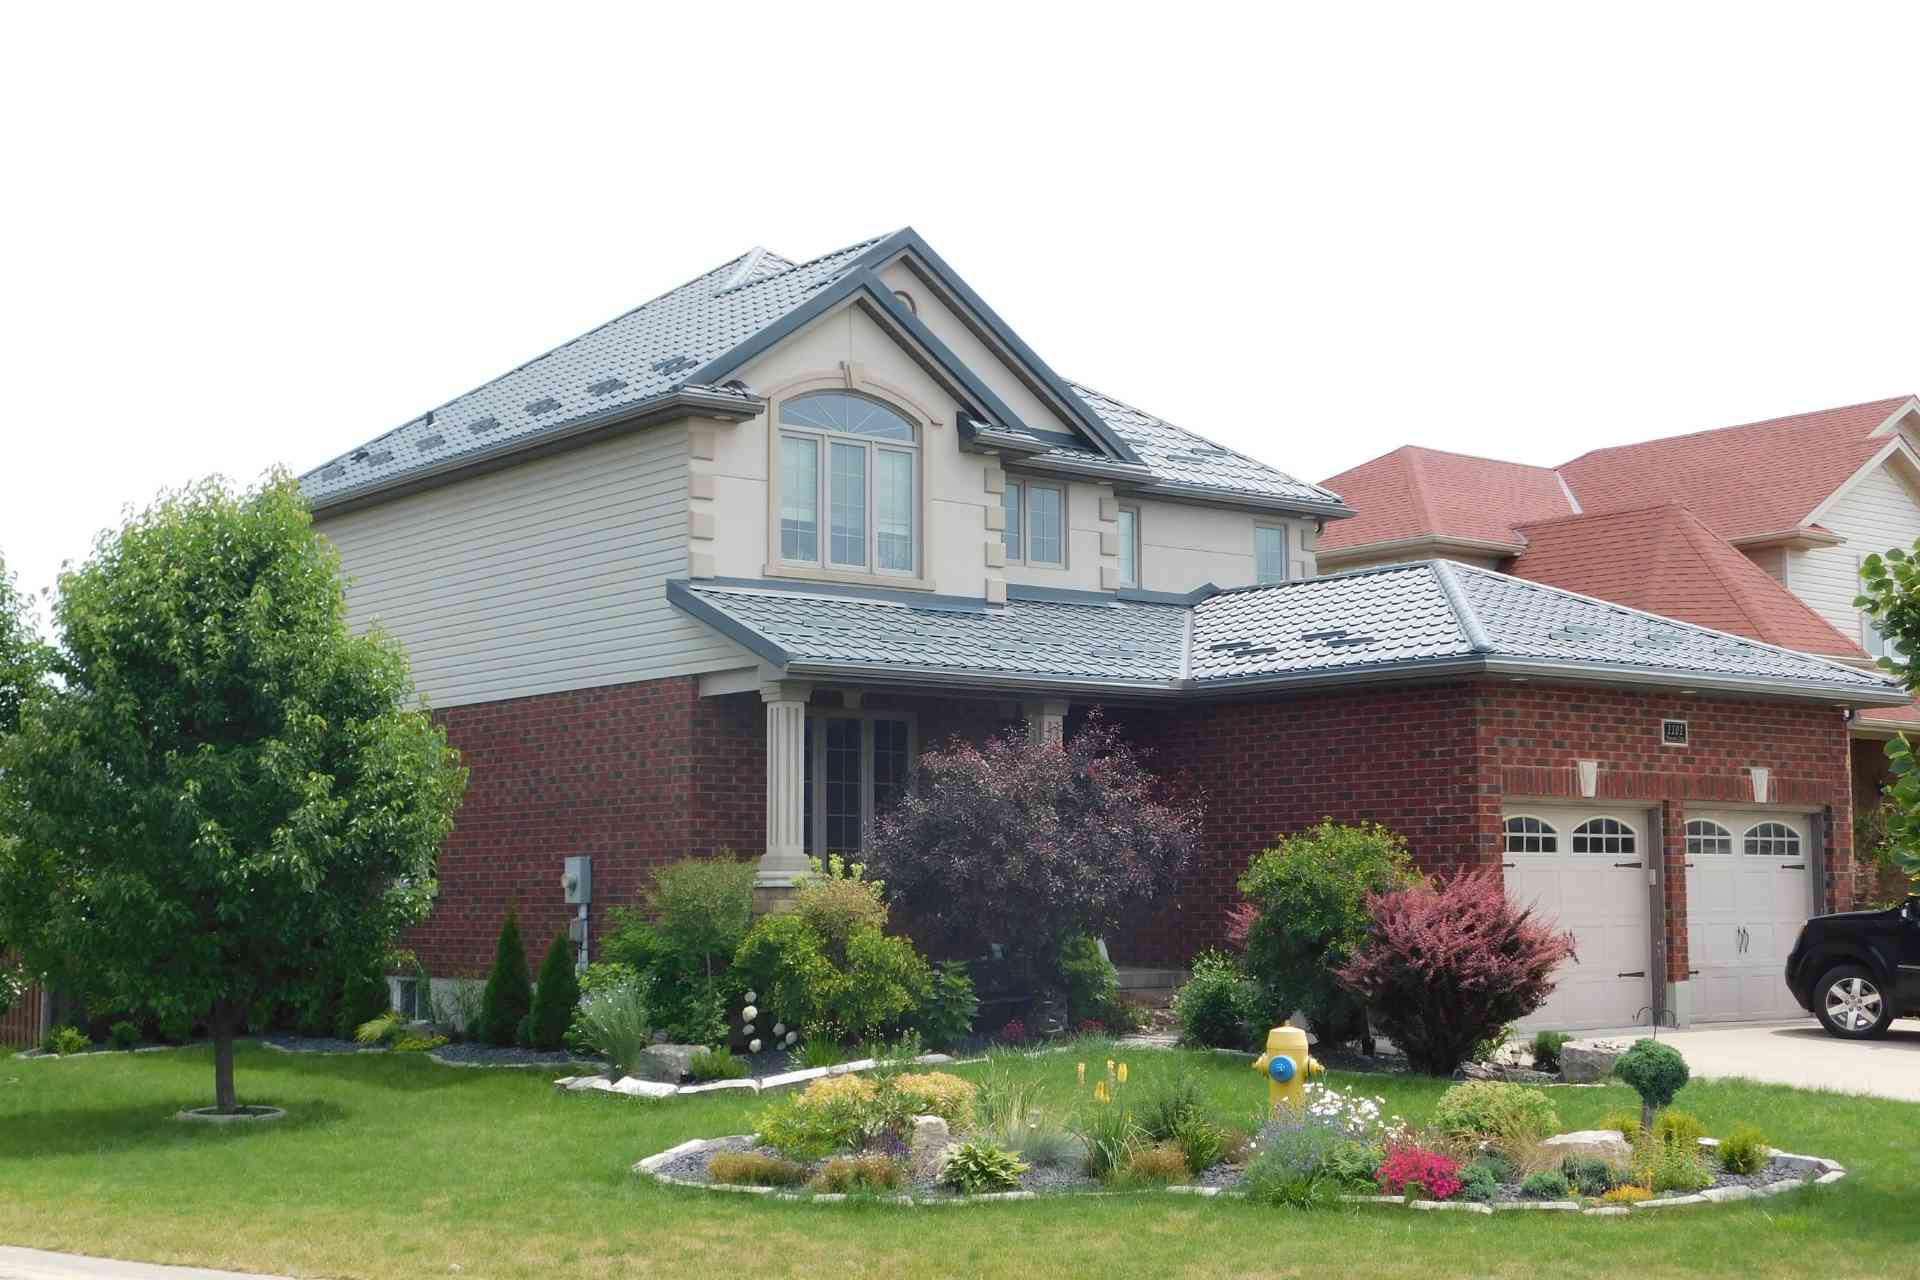 What Are the Different Roofing Materials Used for a Home?